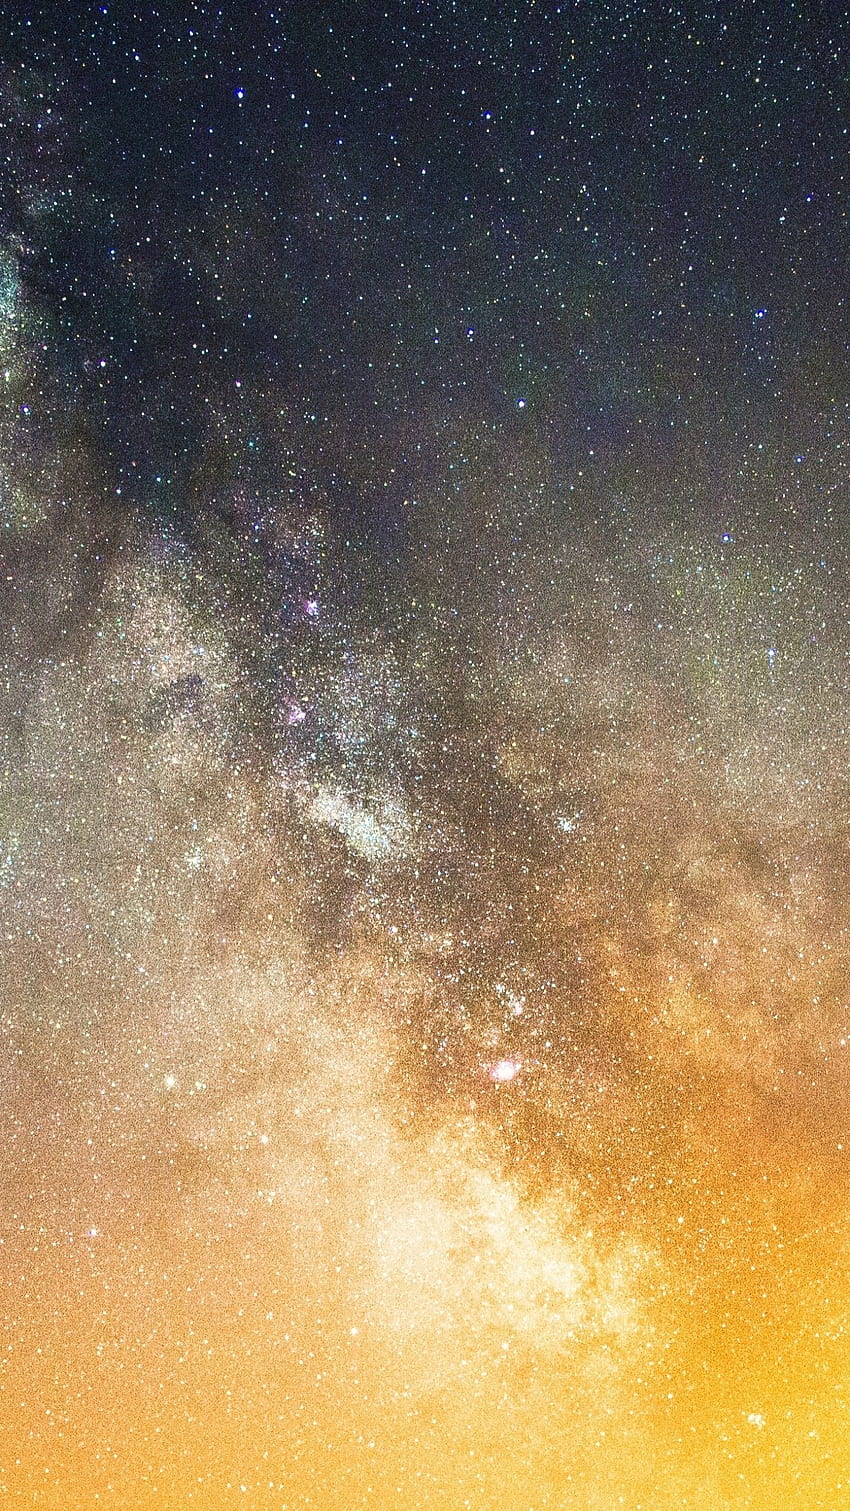 Milky way, Stars, , , Space,. for iPhone, Android, Mobile and HD phone wallpaper